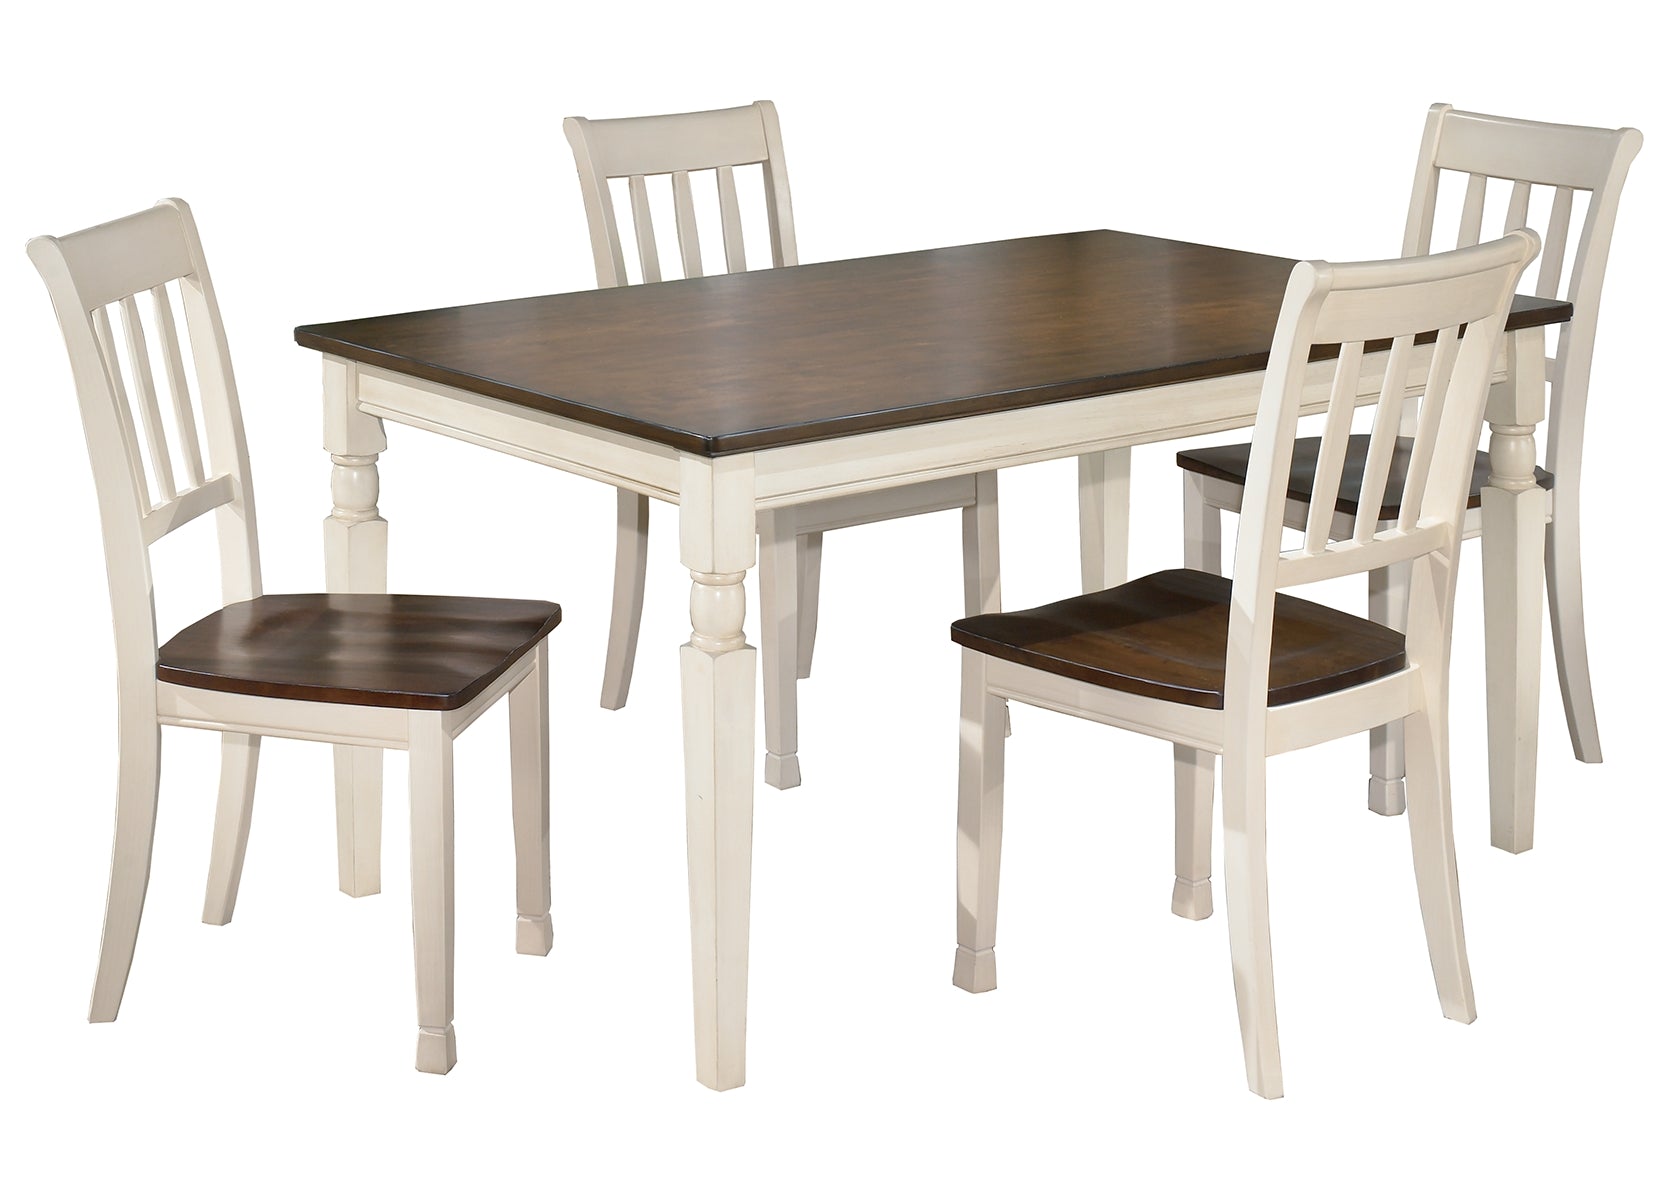 Whitesburg Dining Table and 4 Chairs